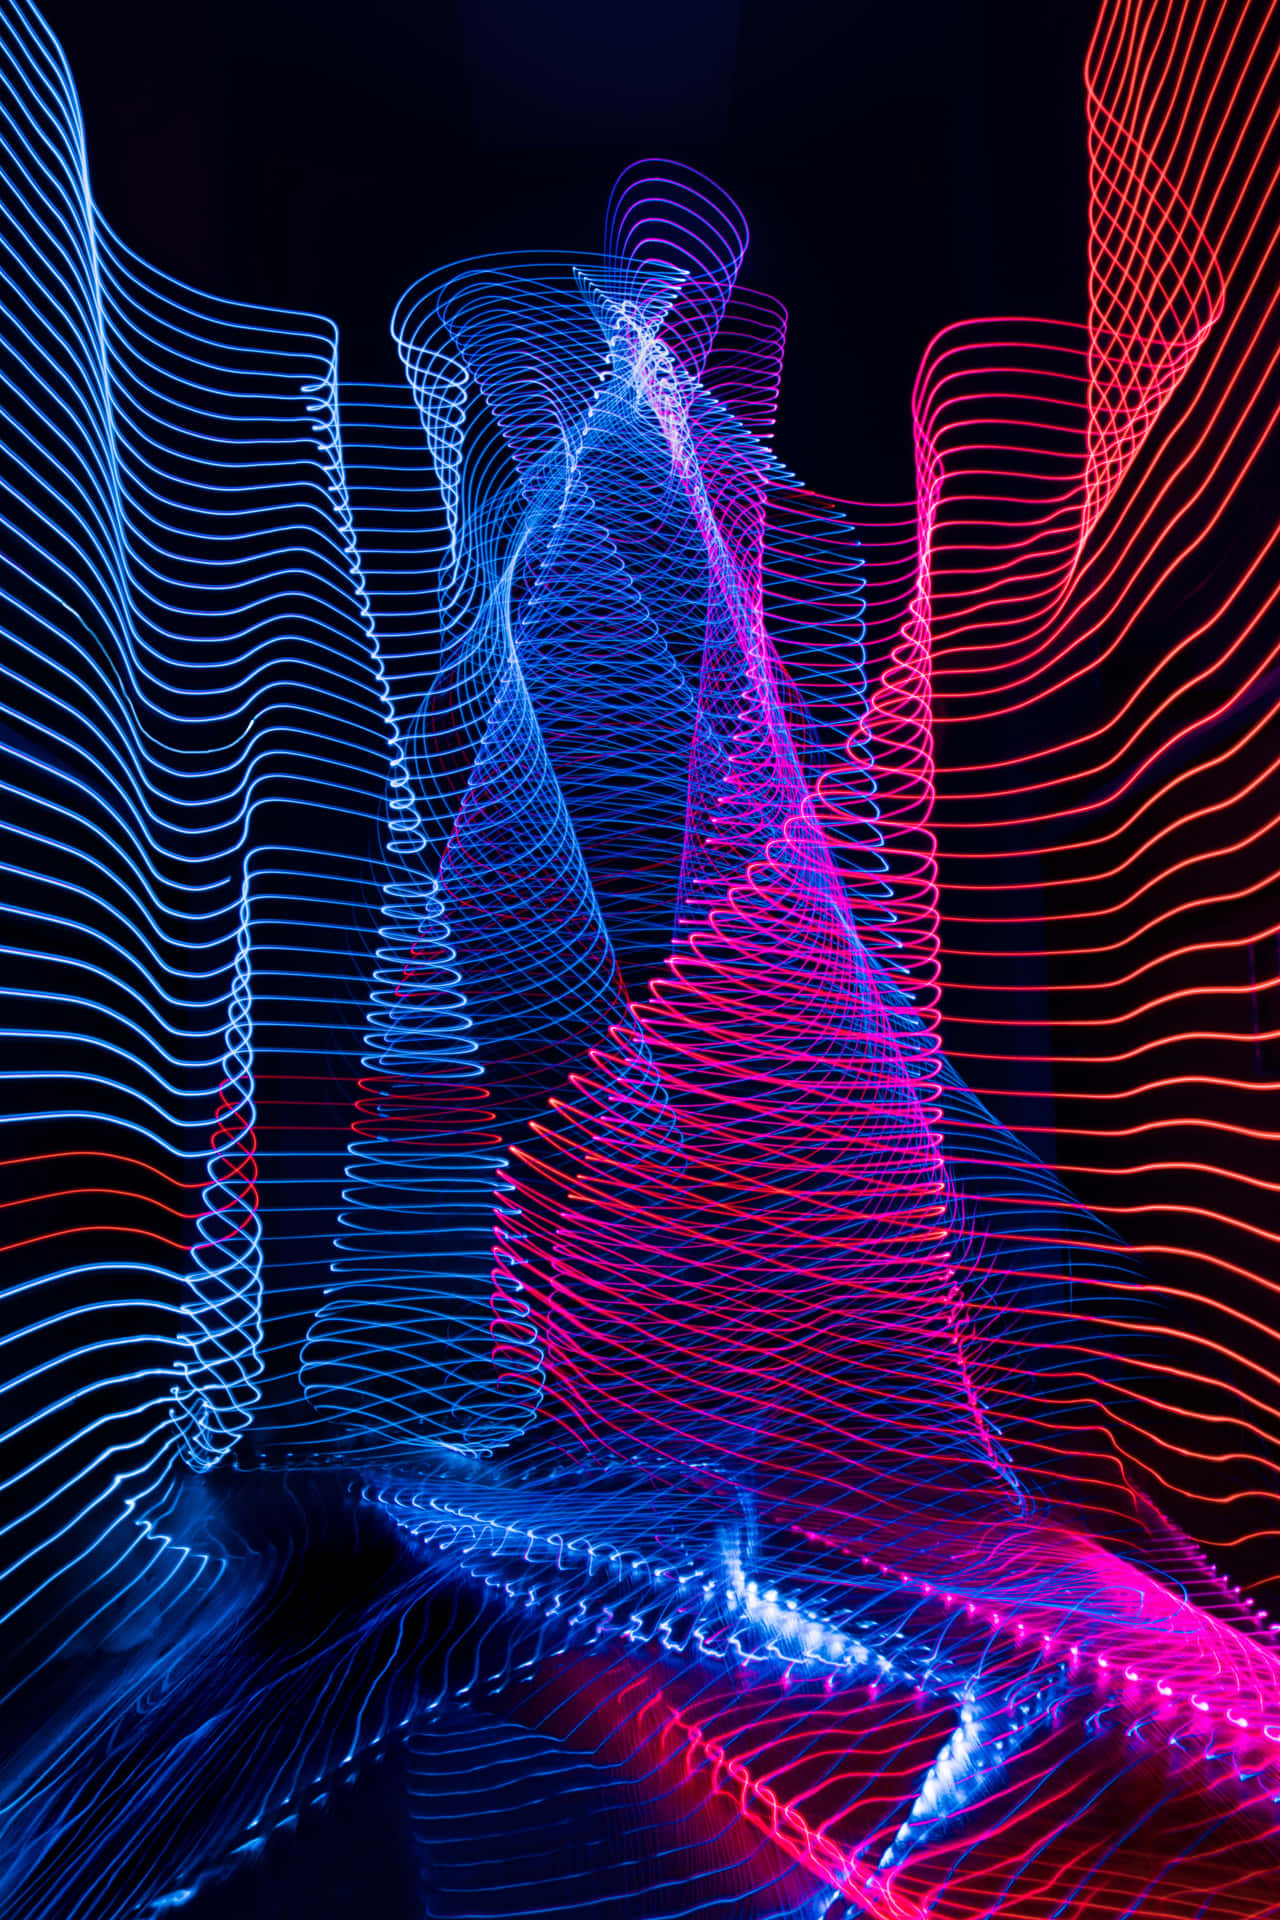 A Colorful Light Art Image With A Dark Background